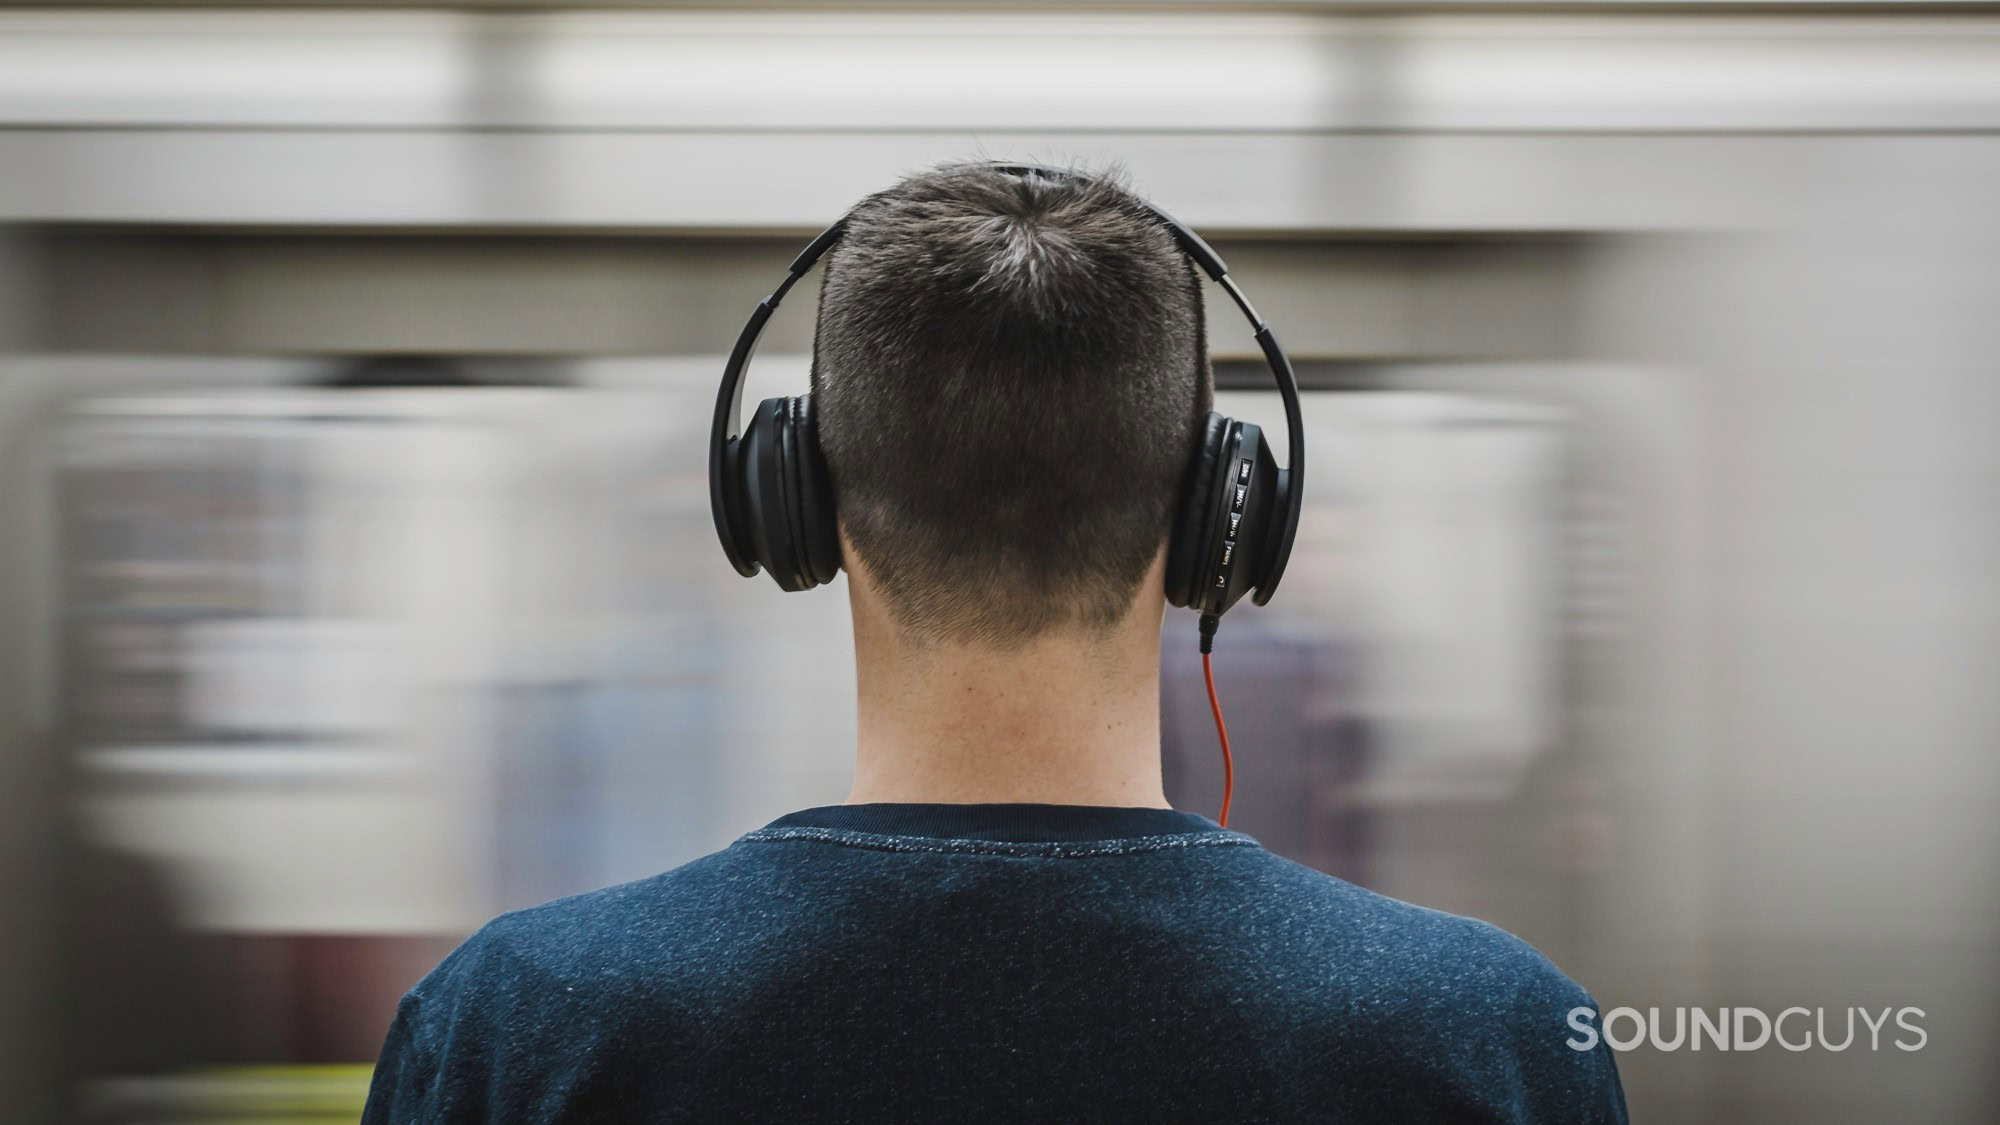 A photo of a young man wearing headphones in front of a moving train